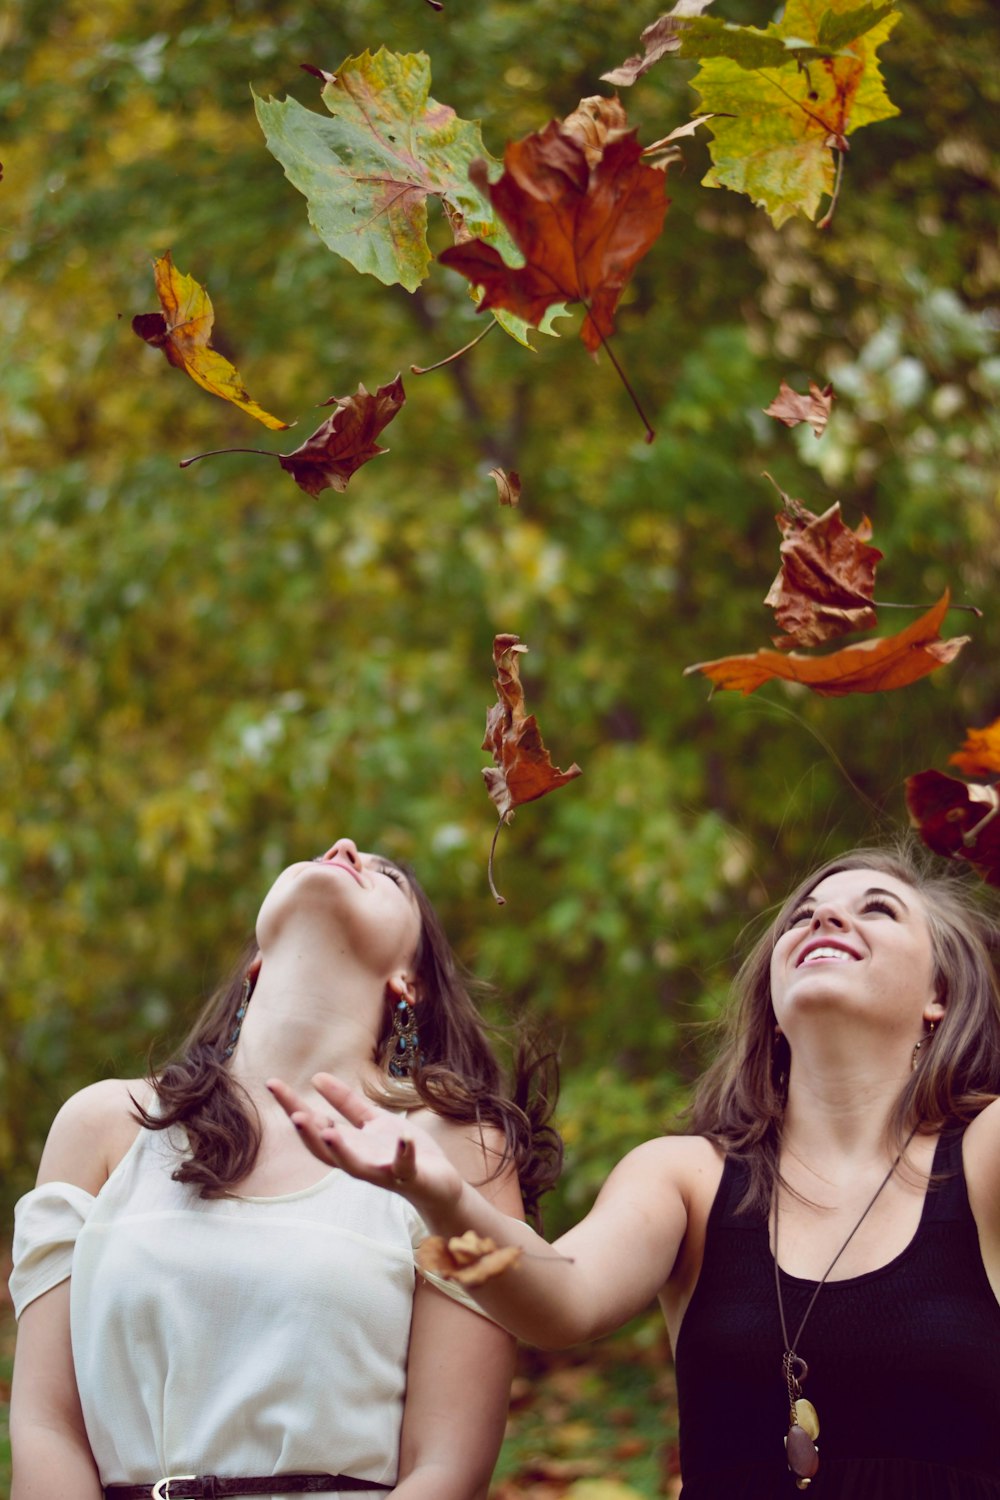 photo of two women throwing leaves during daytime